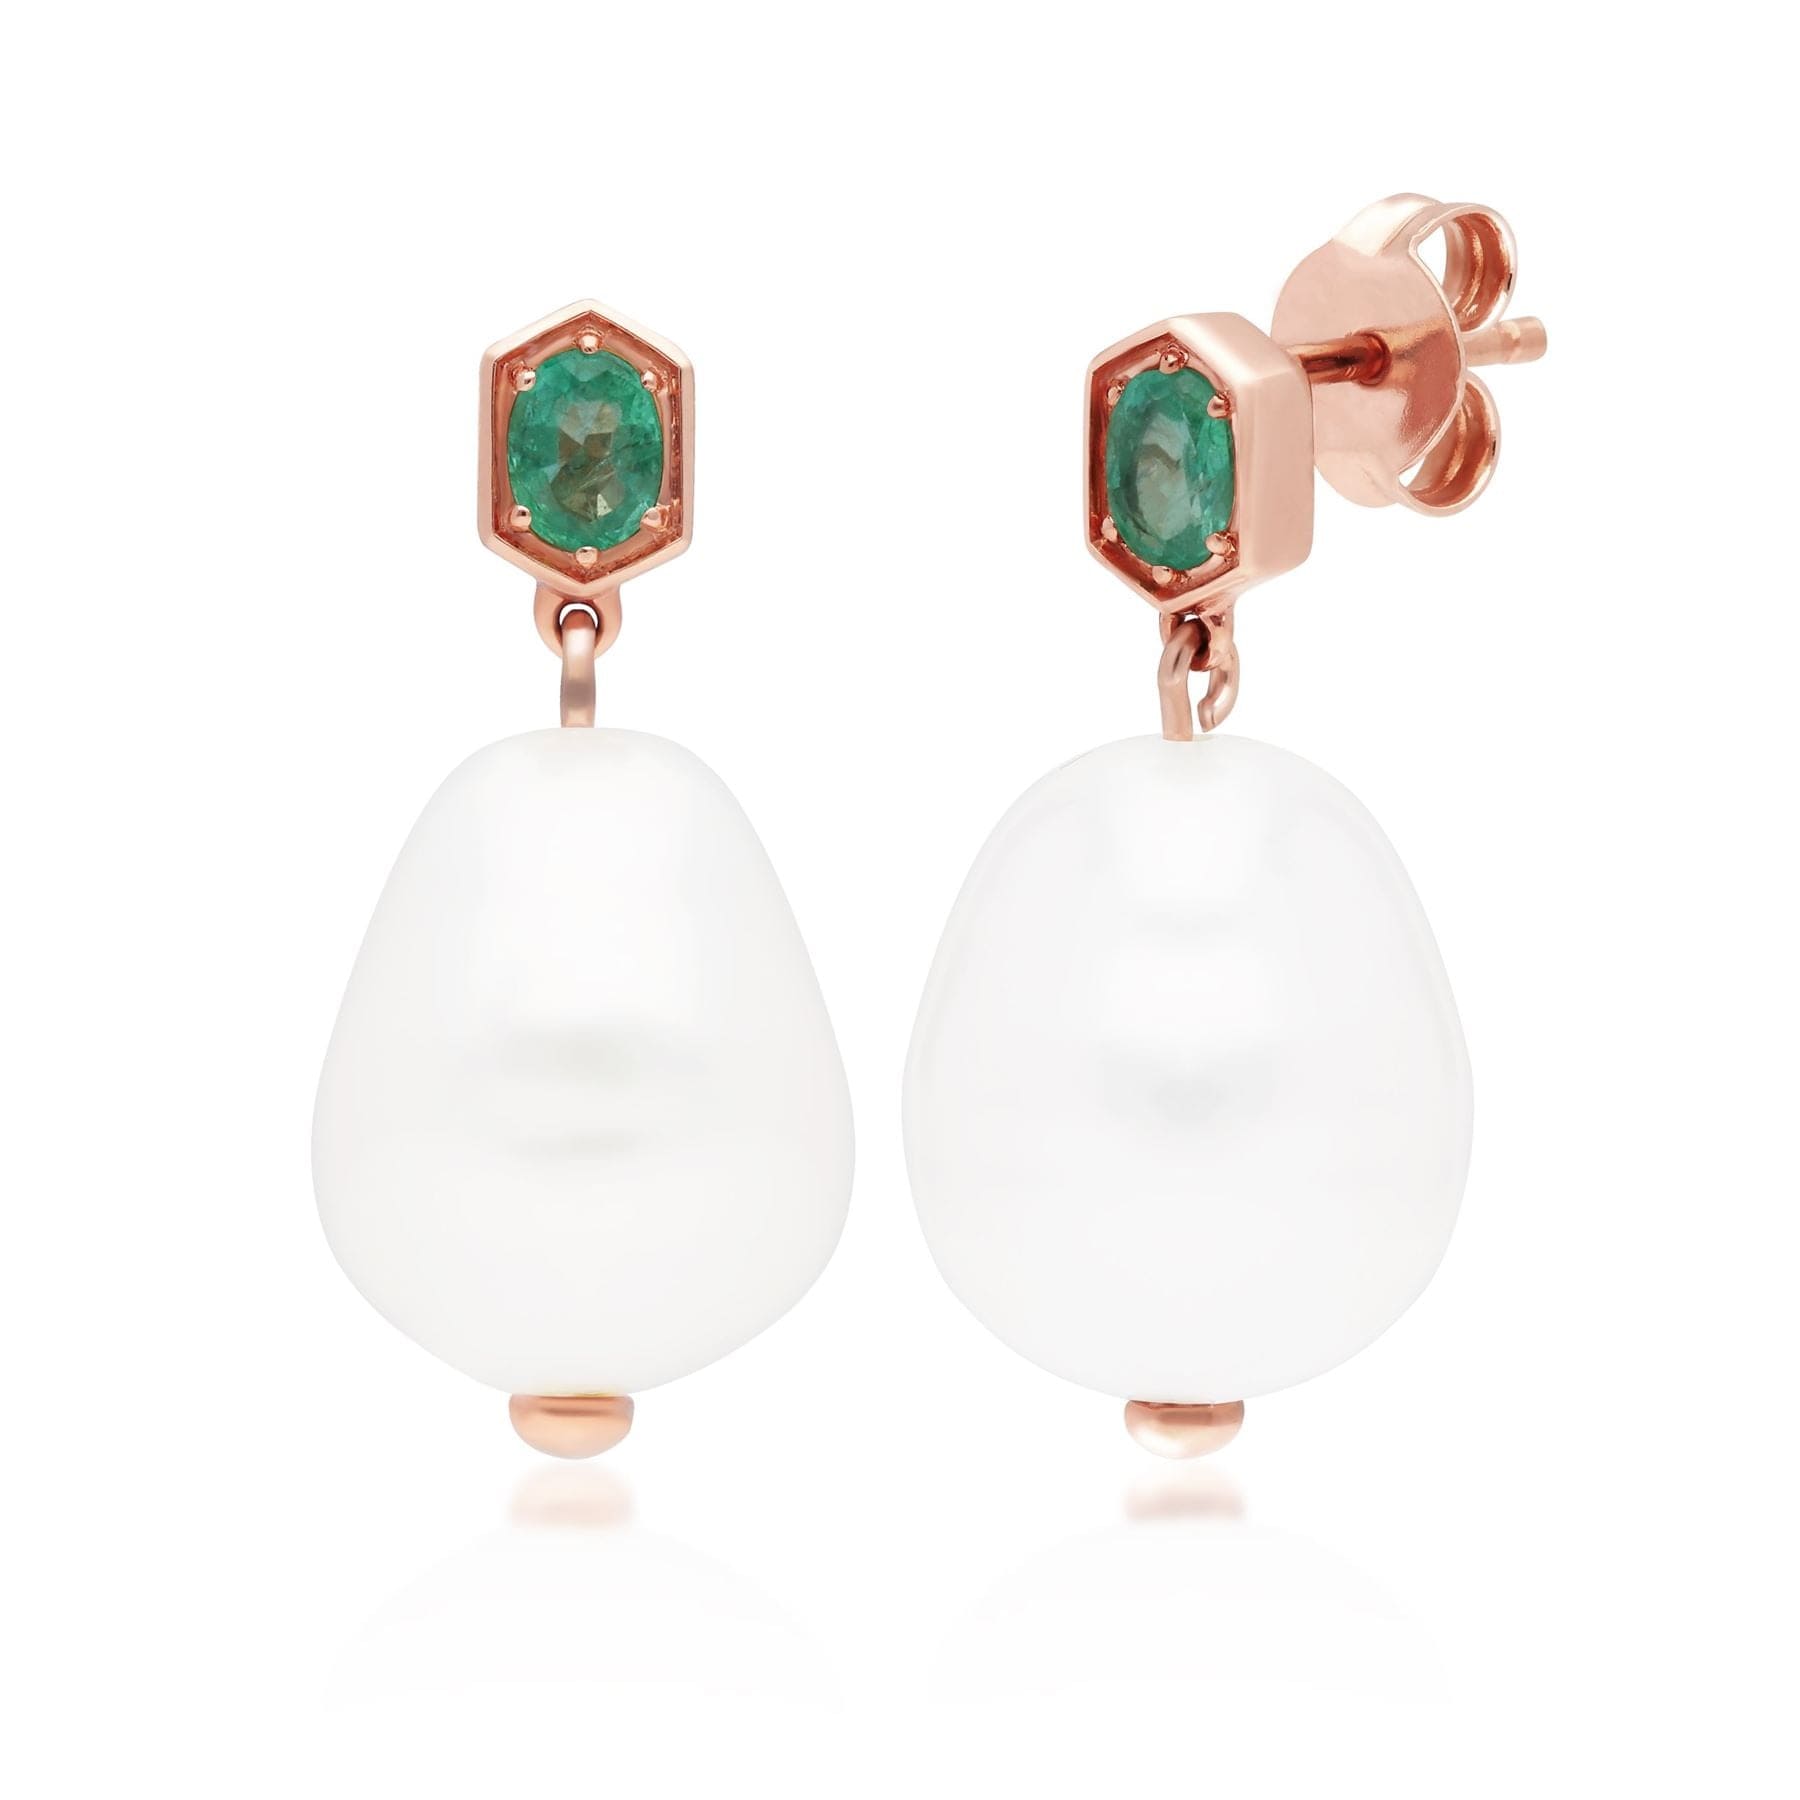 Modern Baroque Pearl & Emerald Drop Earrings in Rose Gold Plated Sterling Silver